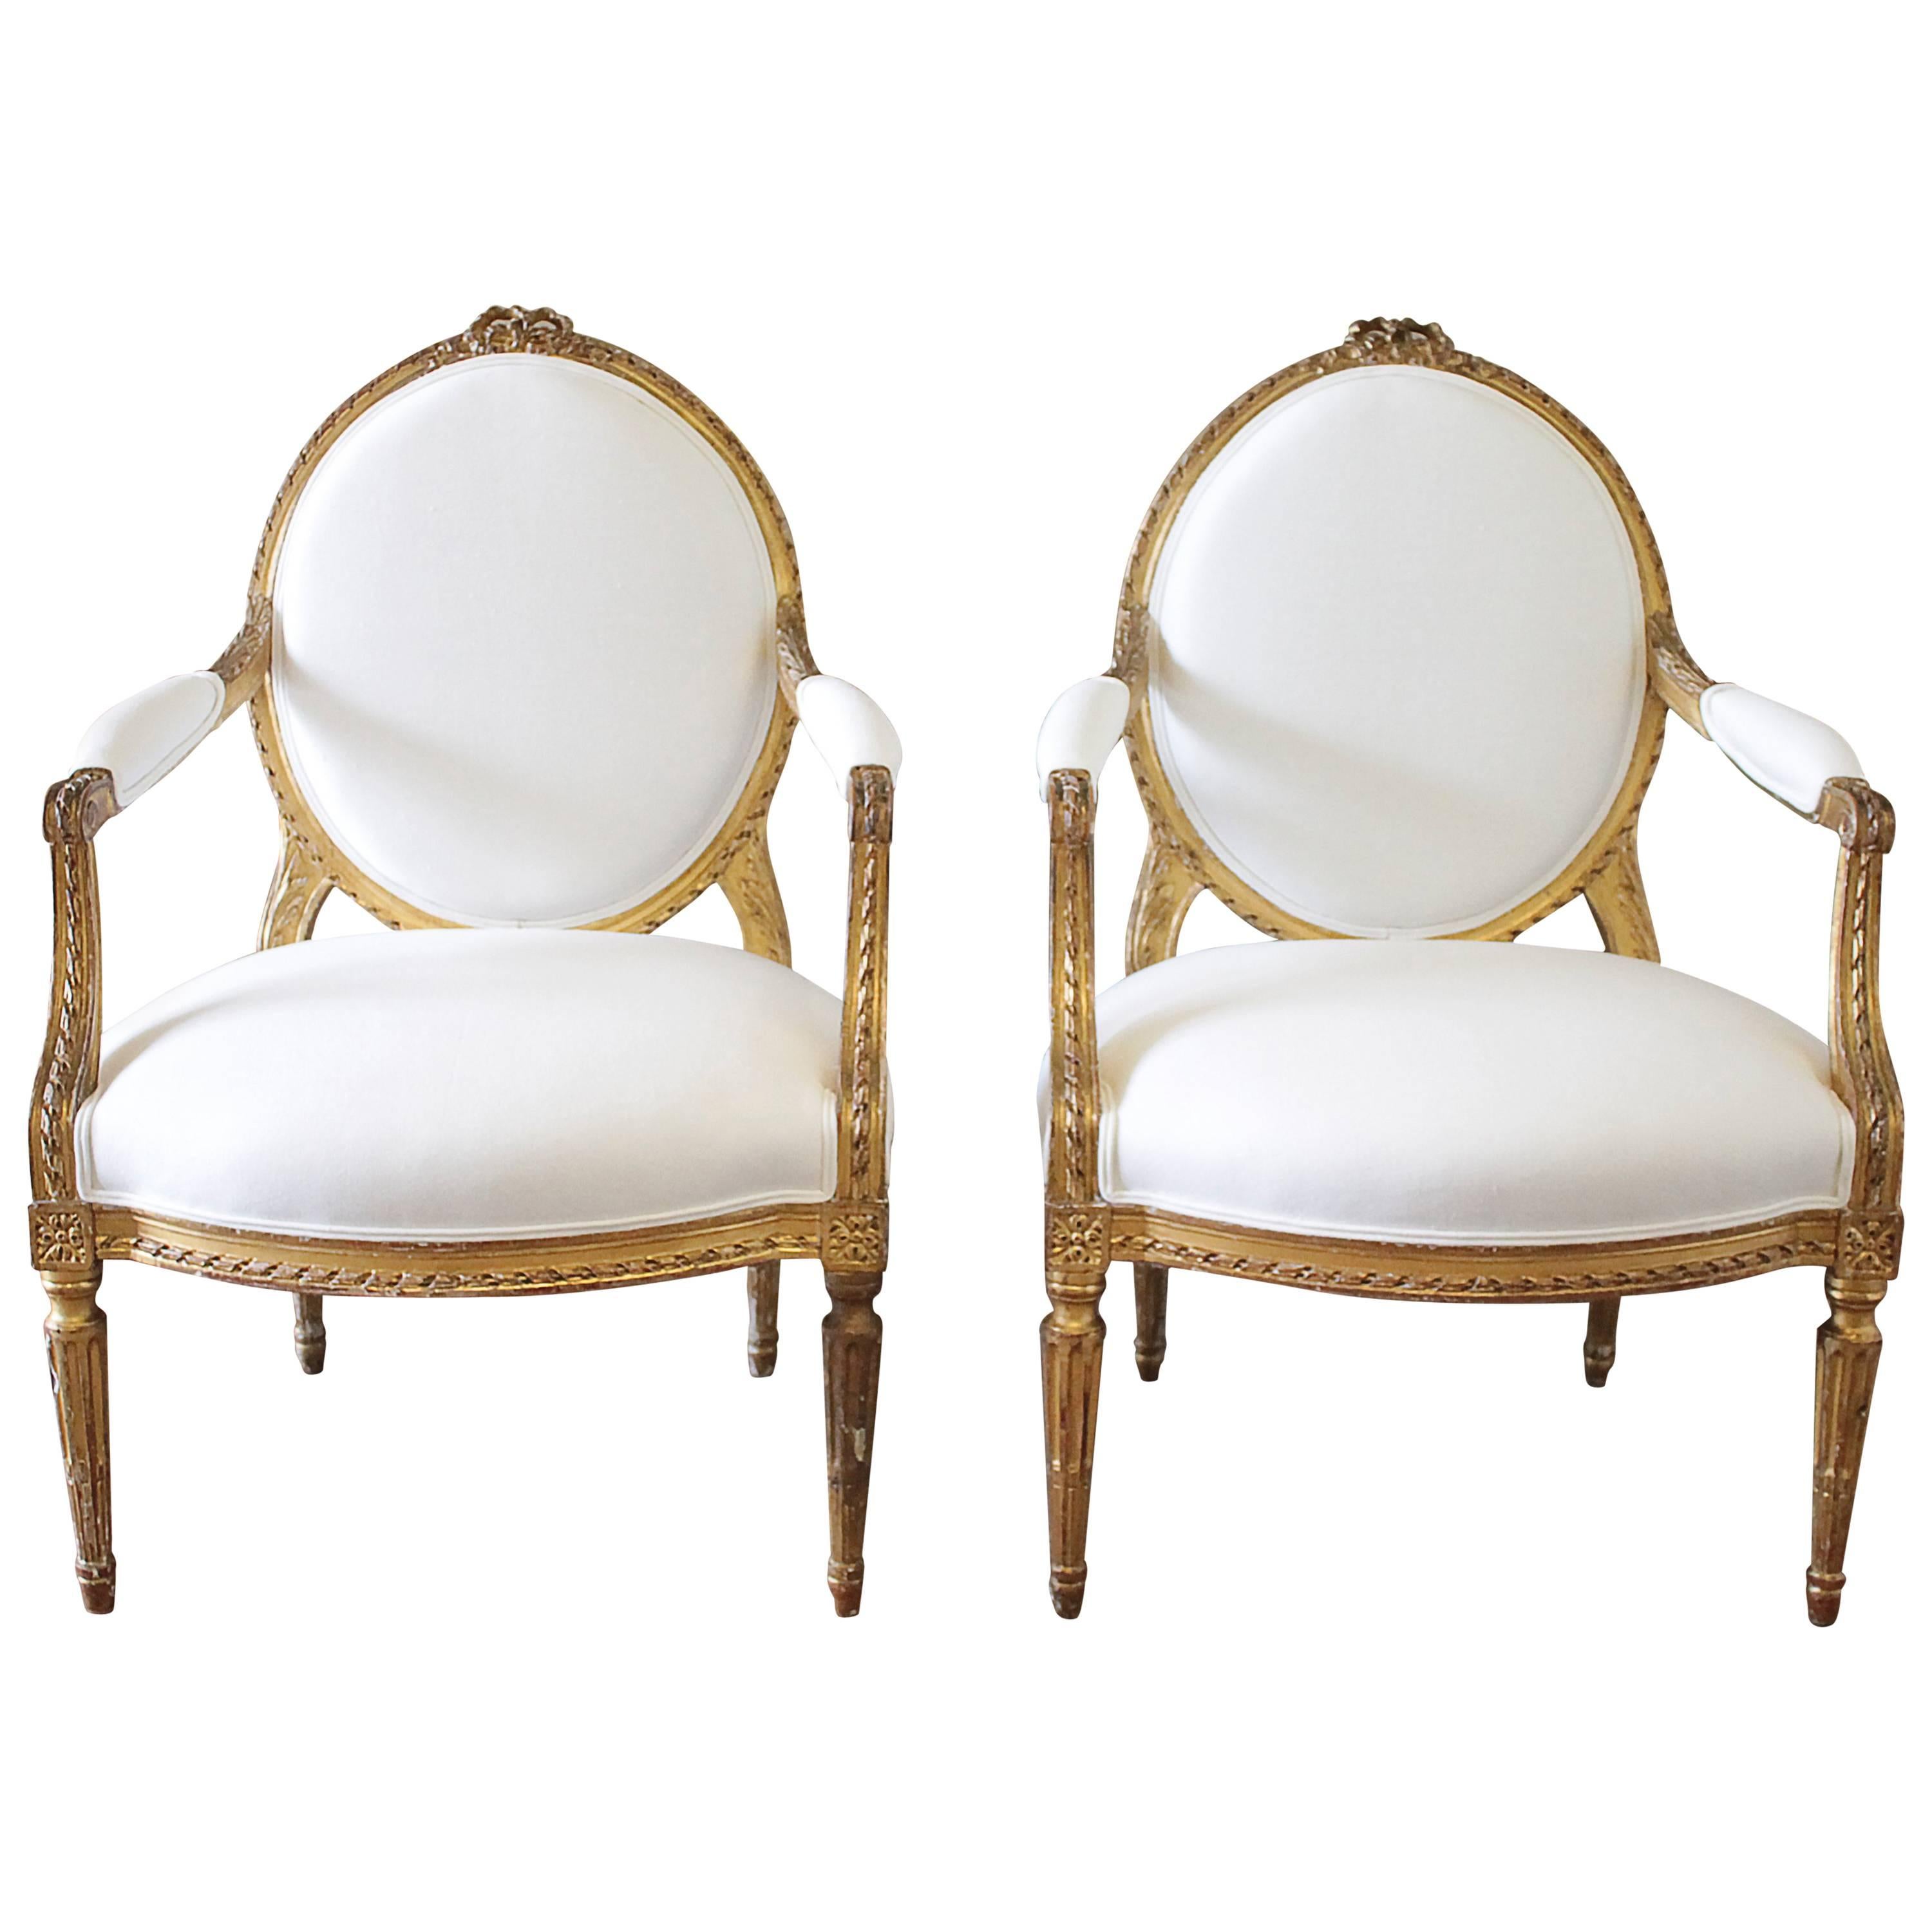 20th Century Carved Giltwood Louis XVI Style Open Armchairs